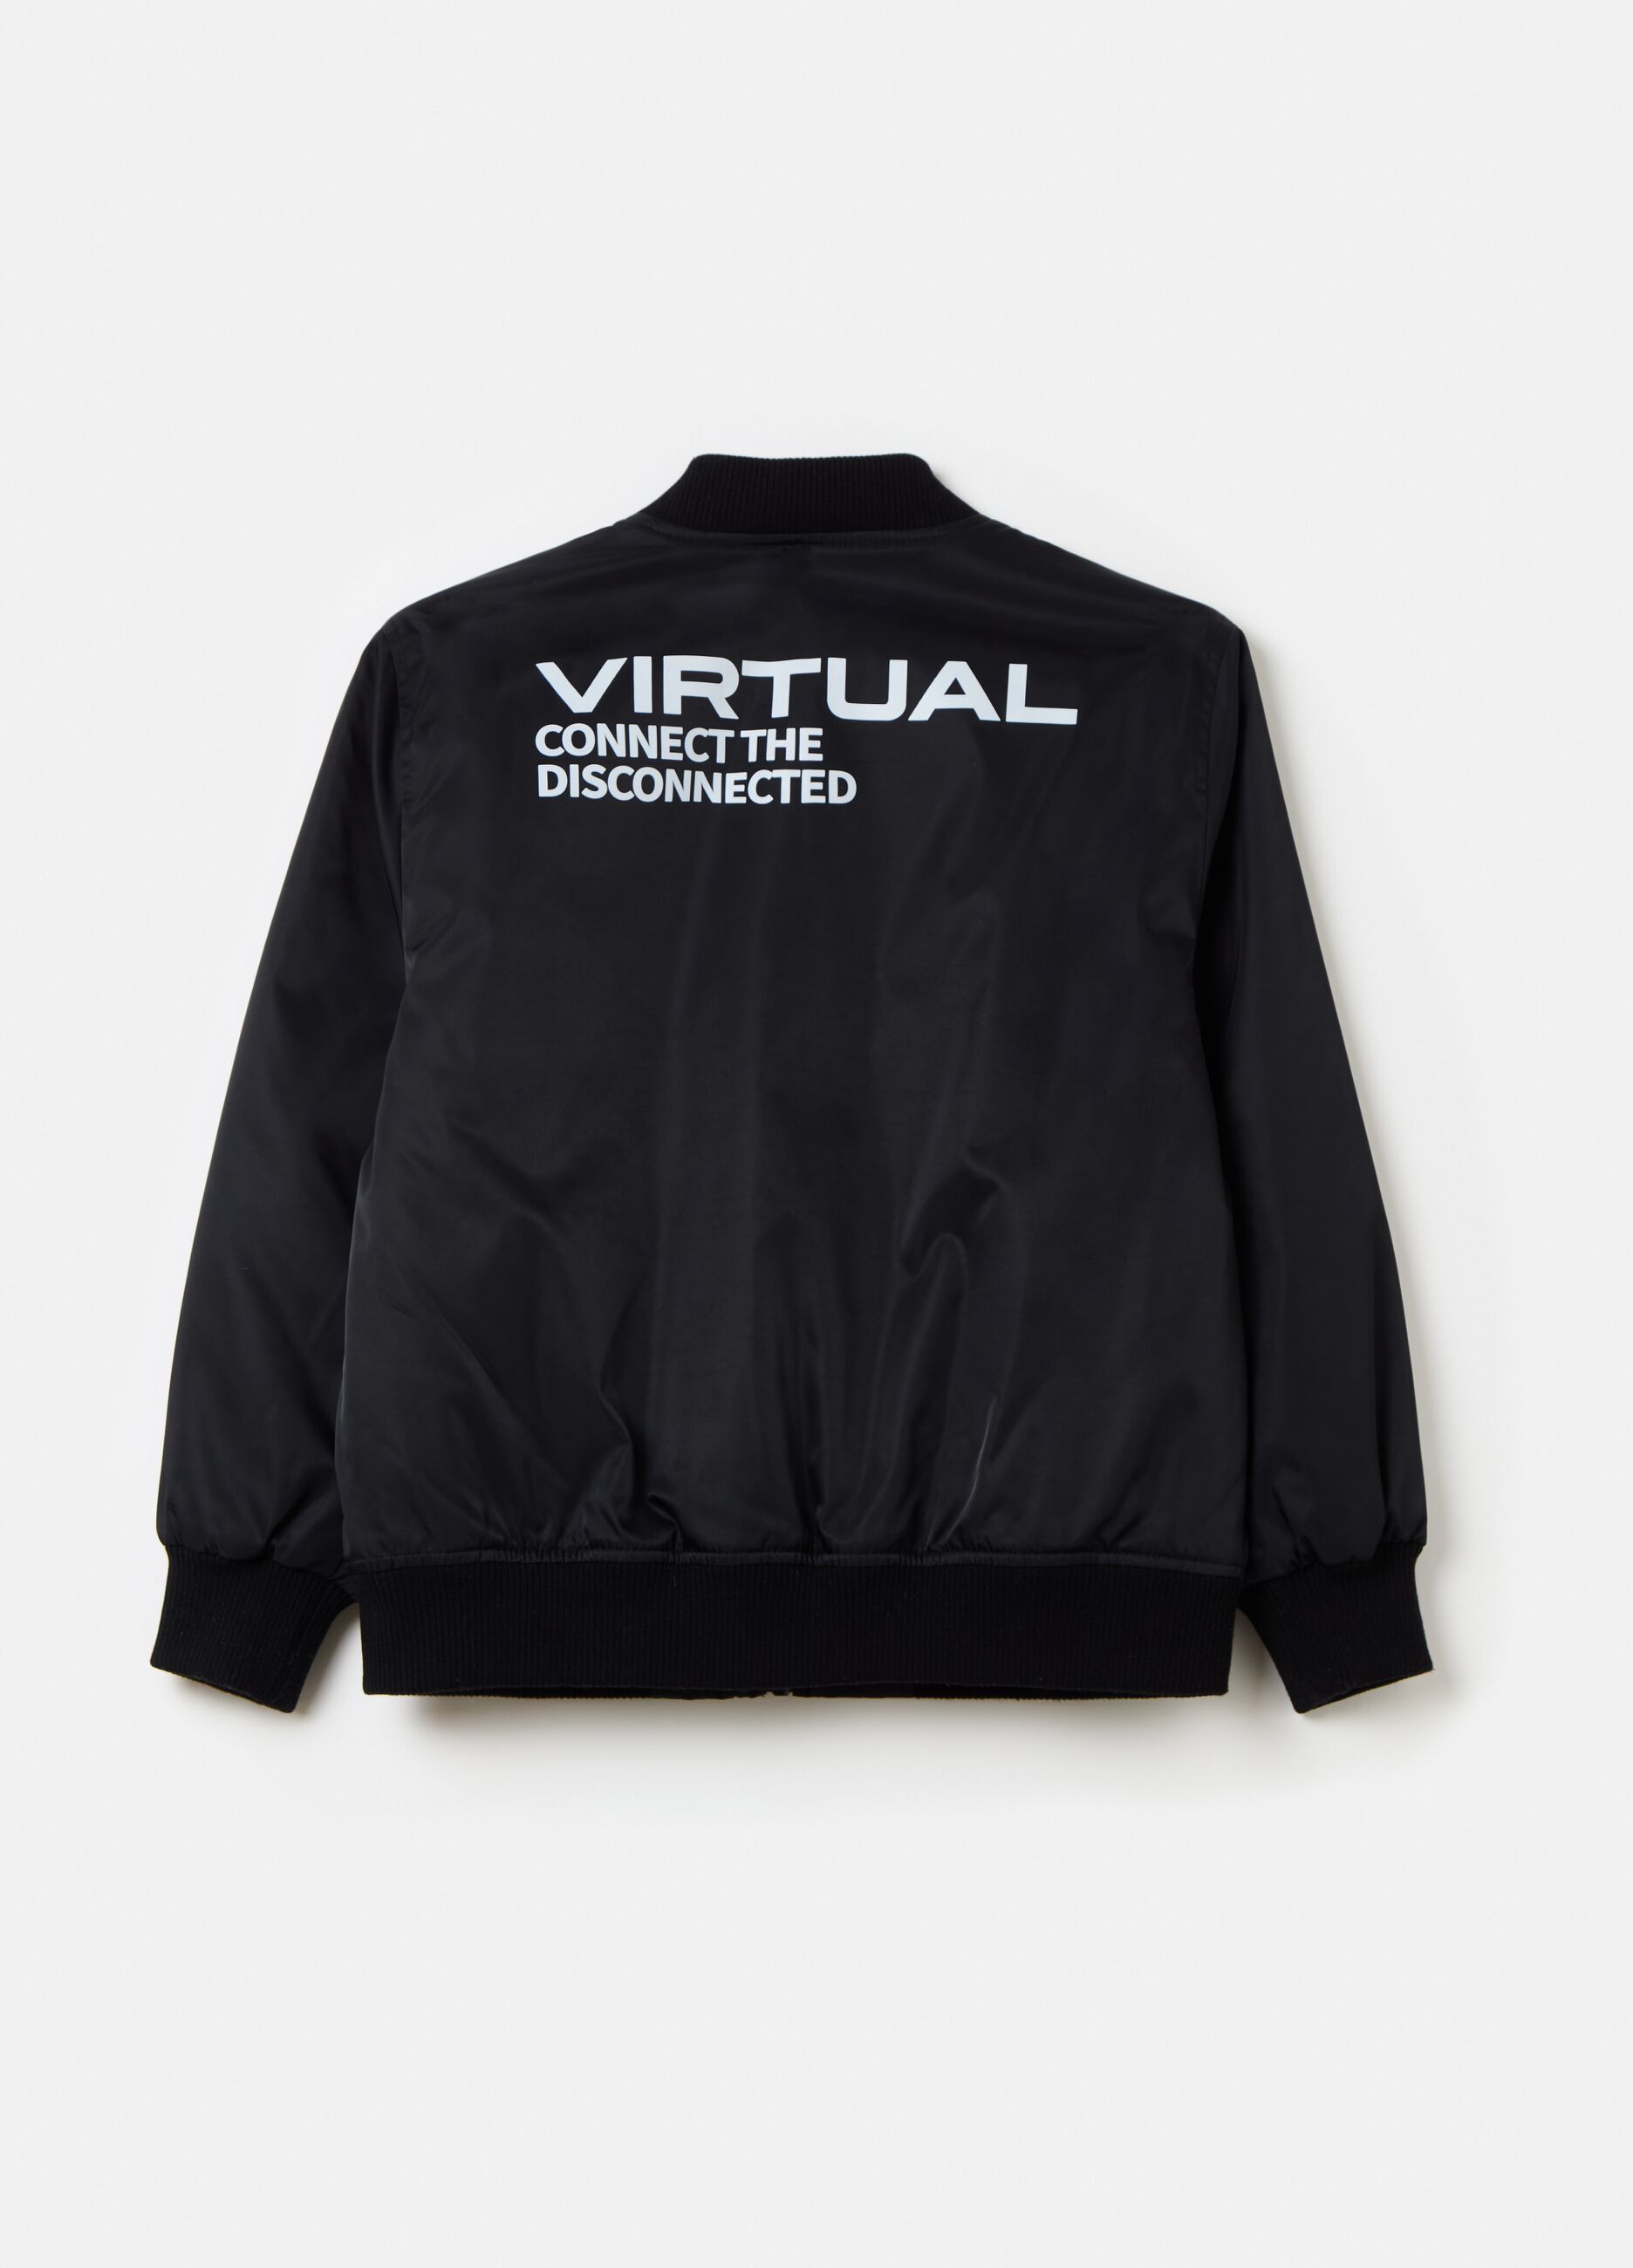 Bomber jacket with lettering print